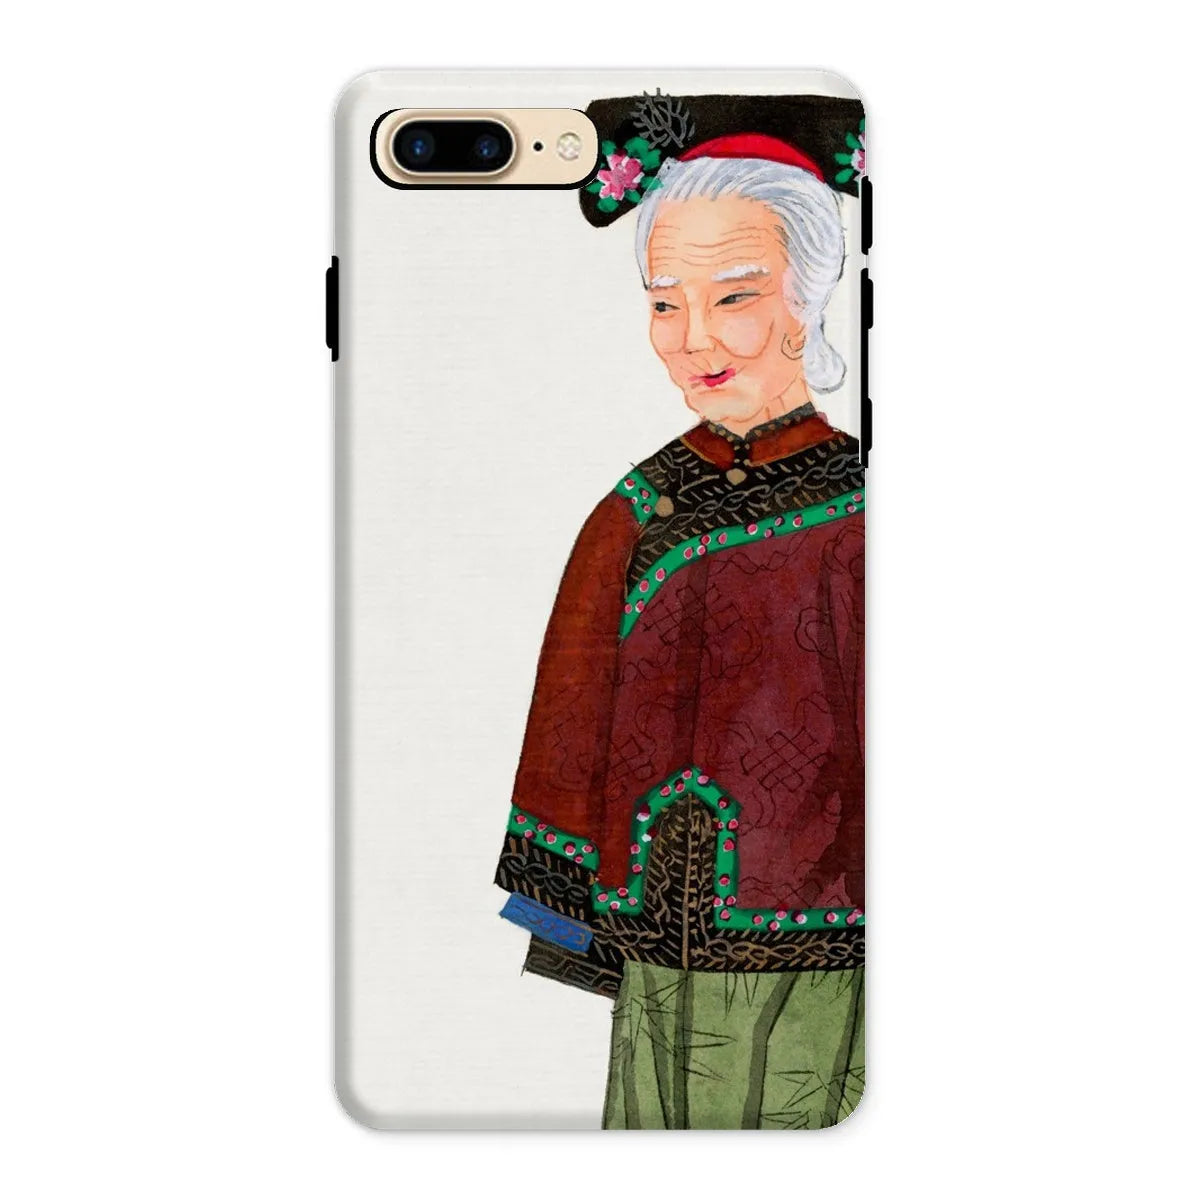 Grand Dame Too - Aesthetic Chinese Art Phone Case - Iphone 8 Plus / Matte - Mobile Phone Cases - Aesthetic Art